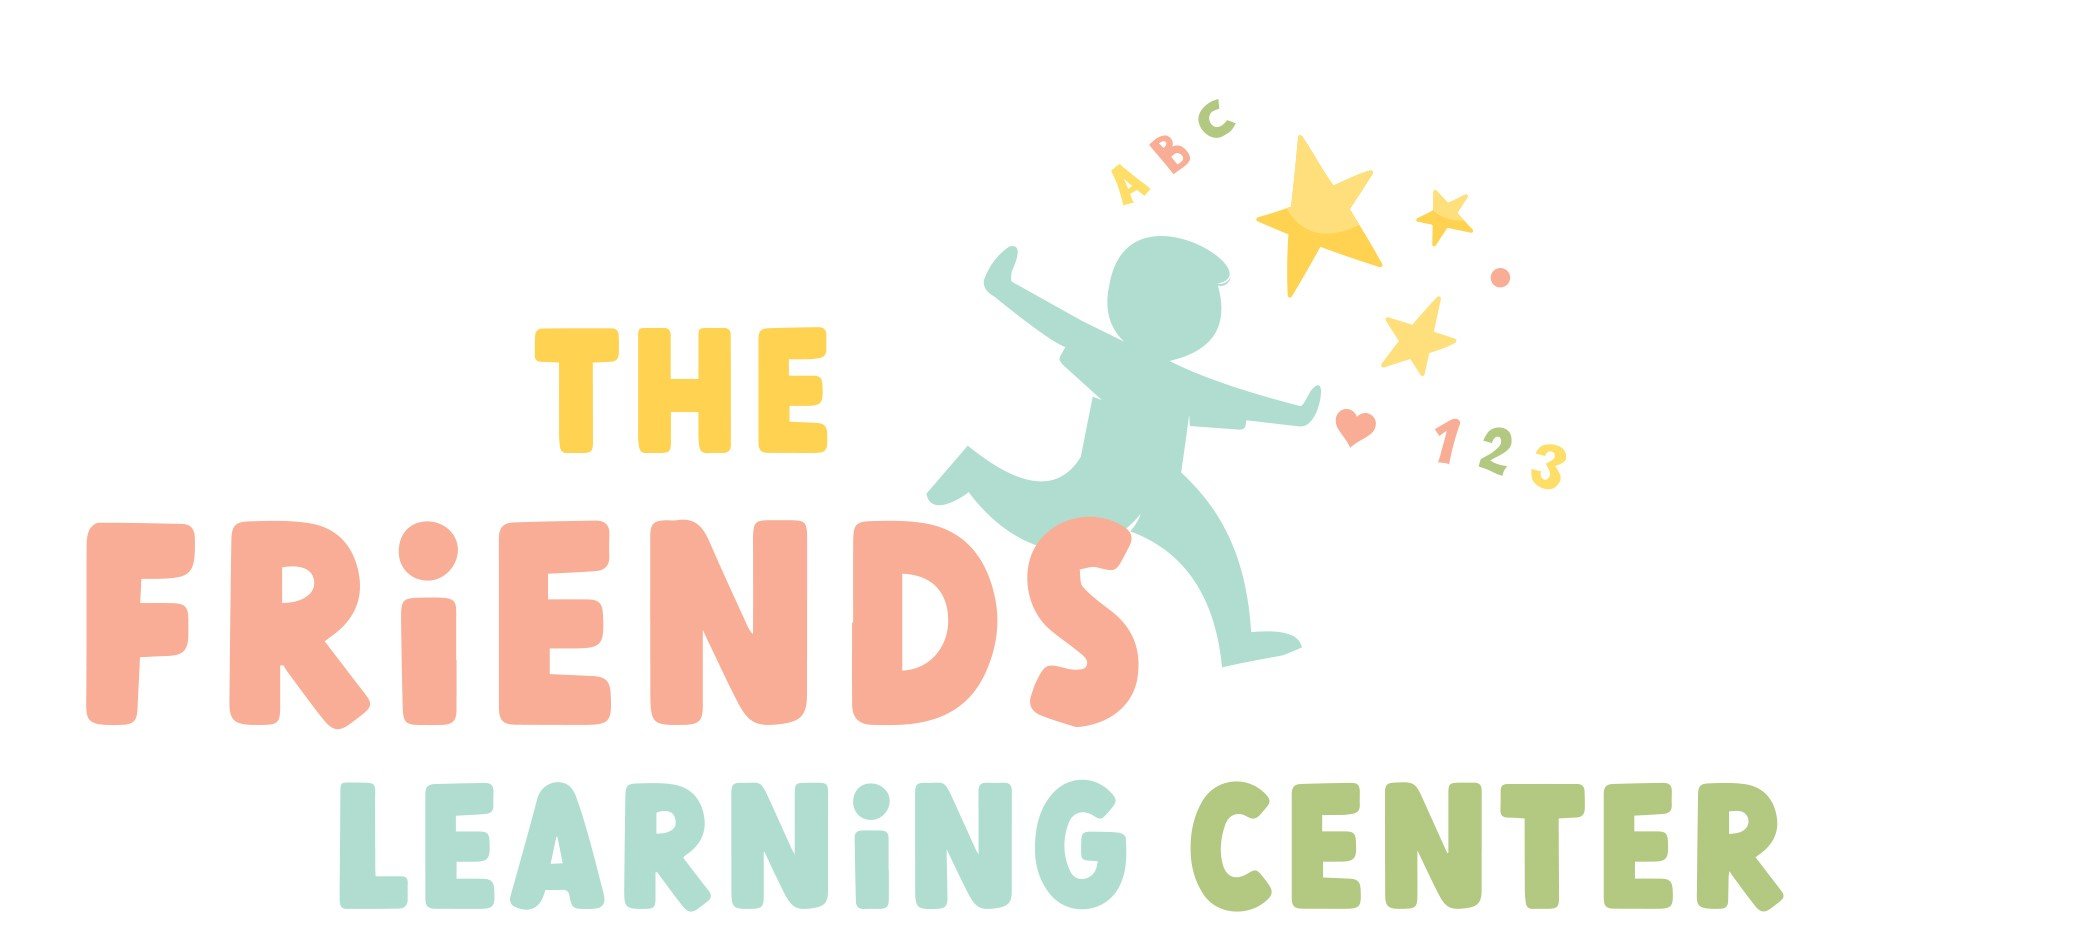 The Friends Learning Center